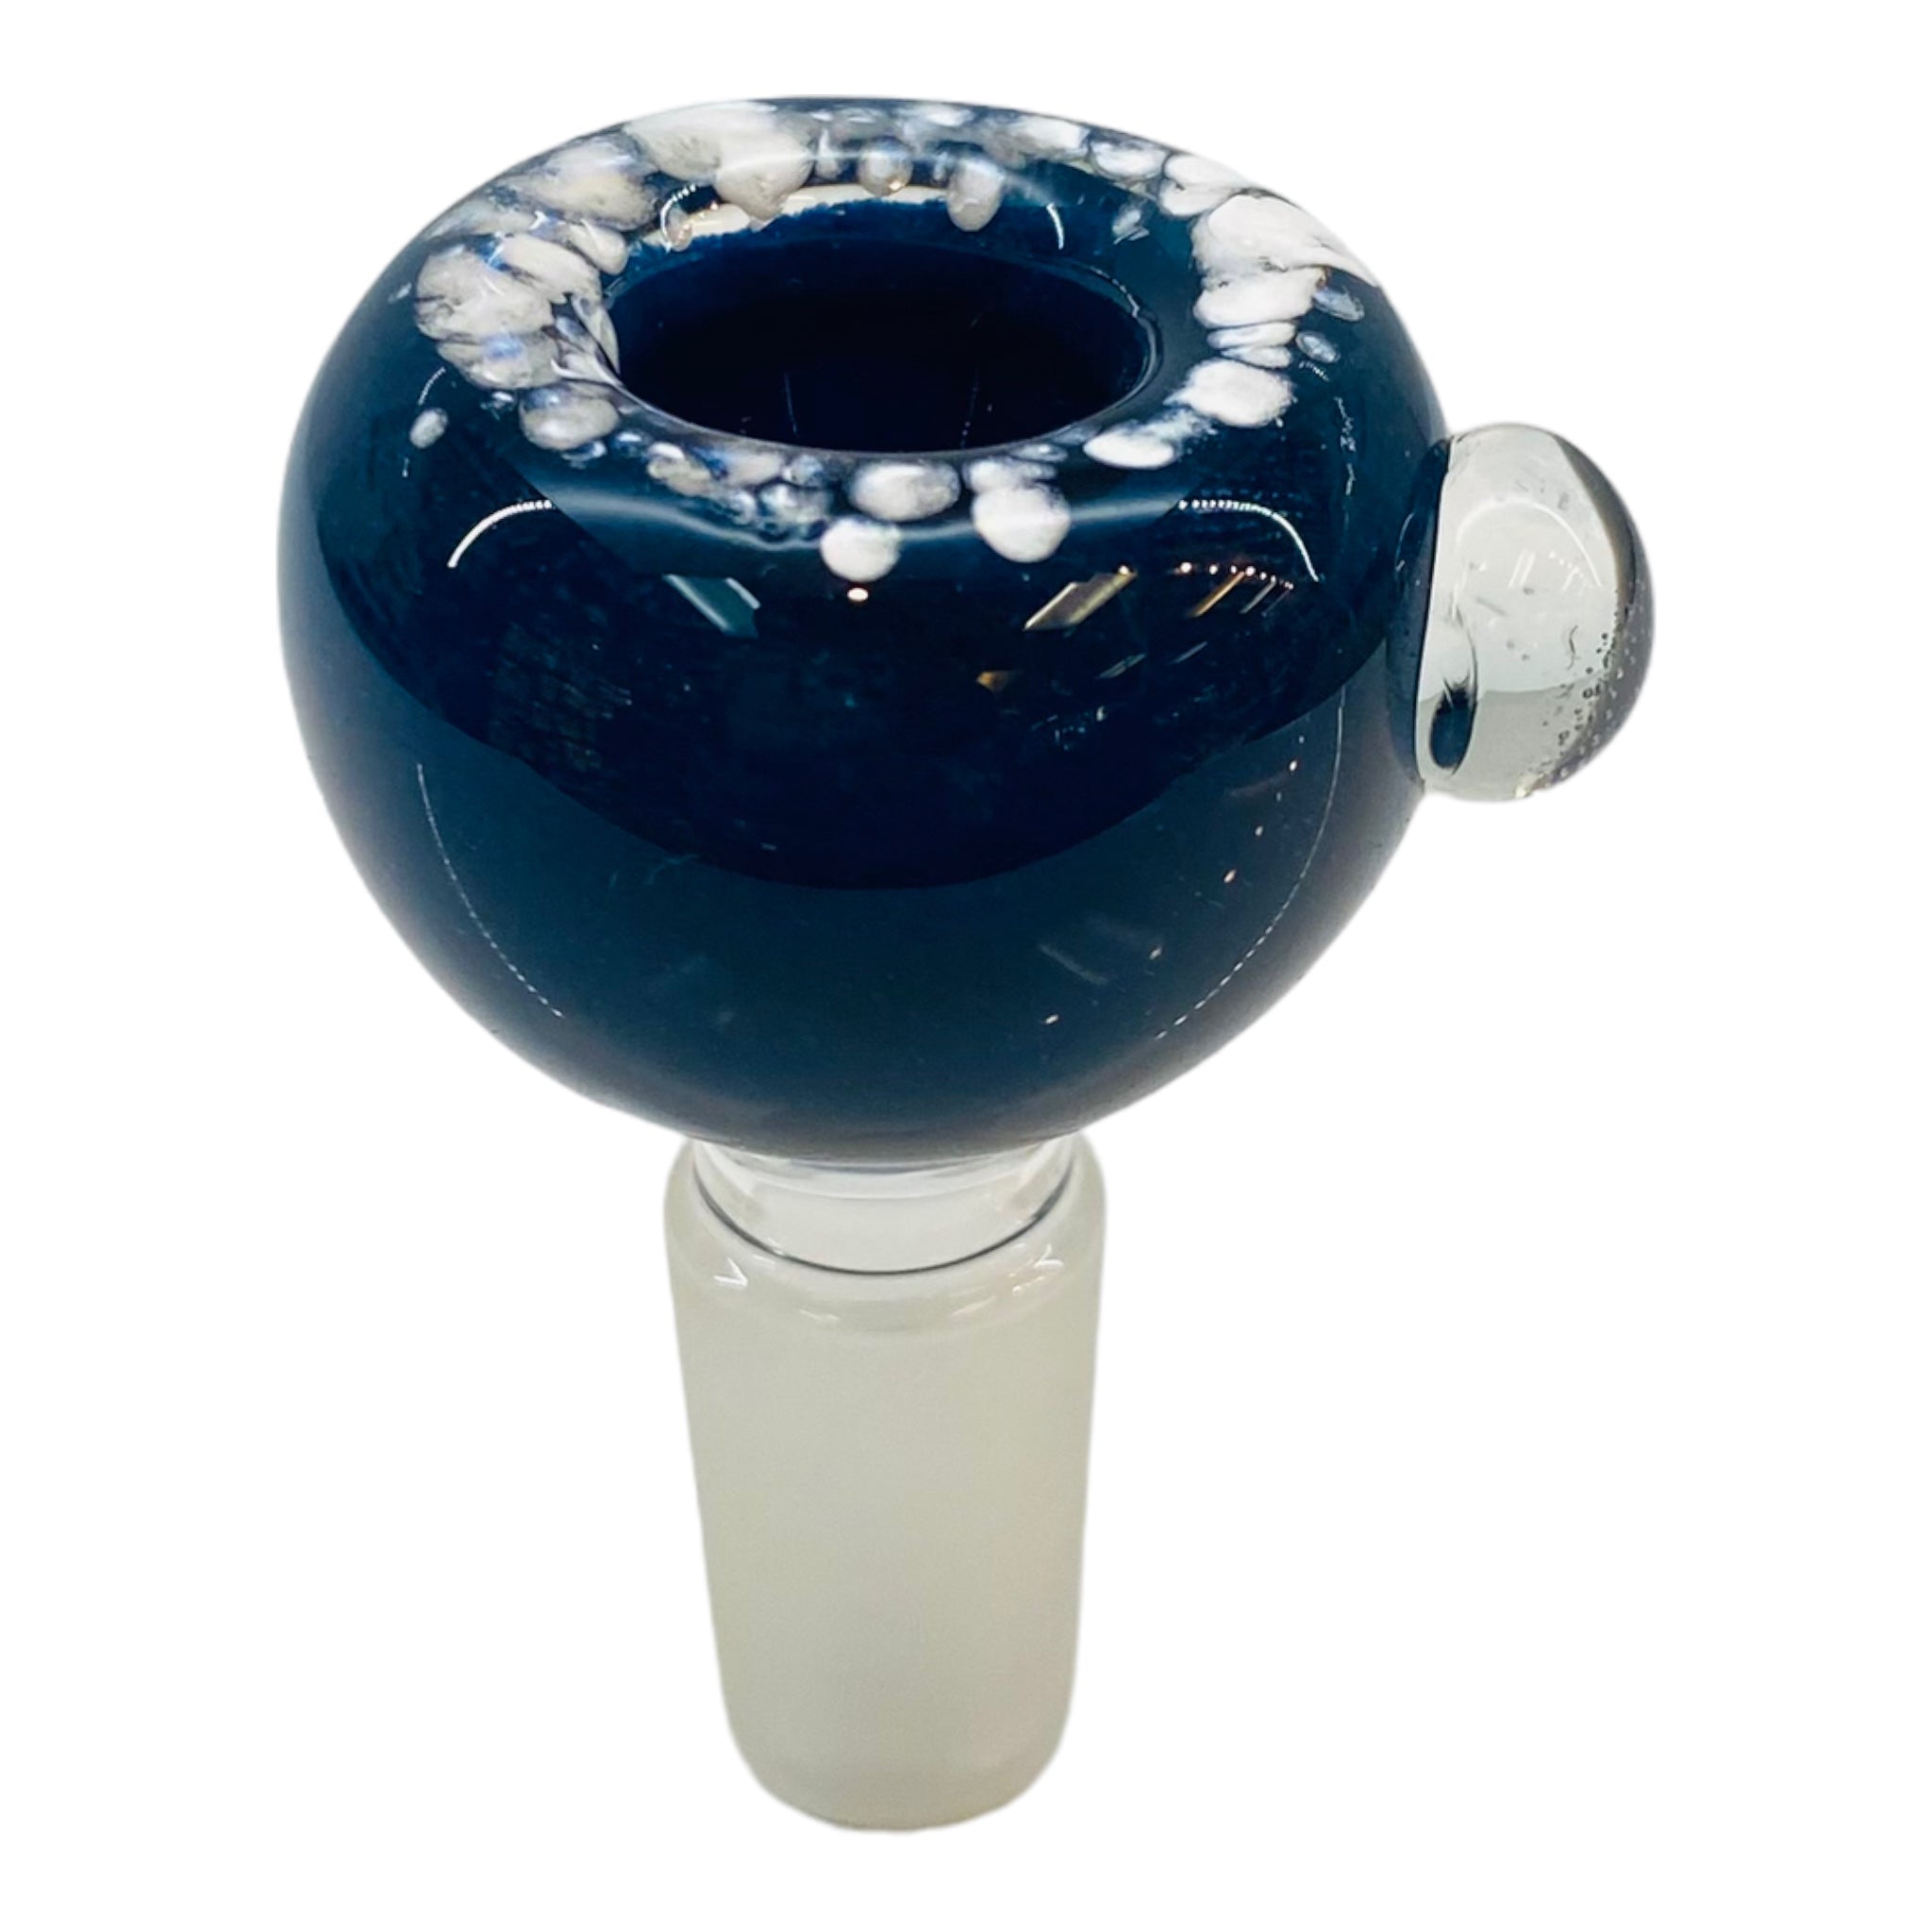 14mm Flower Bowl - Bubble With Frosted Rim Bong Bowl Piece - Blue